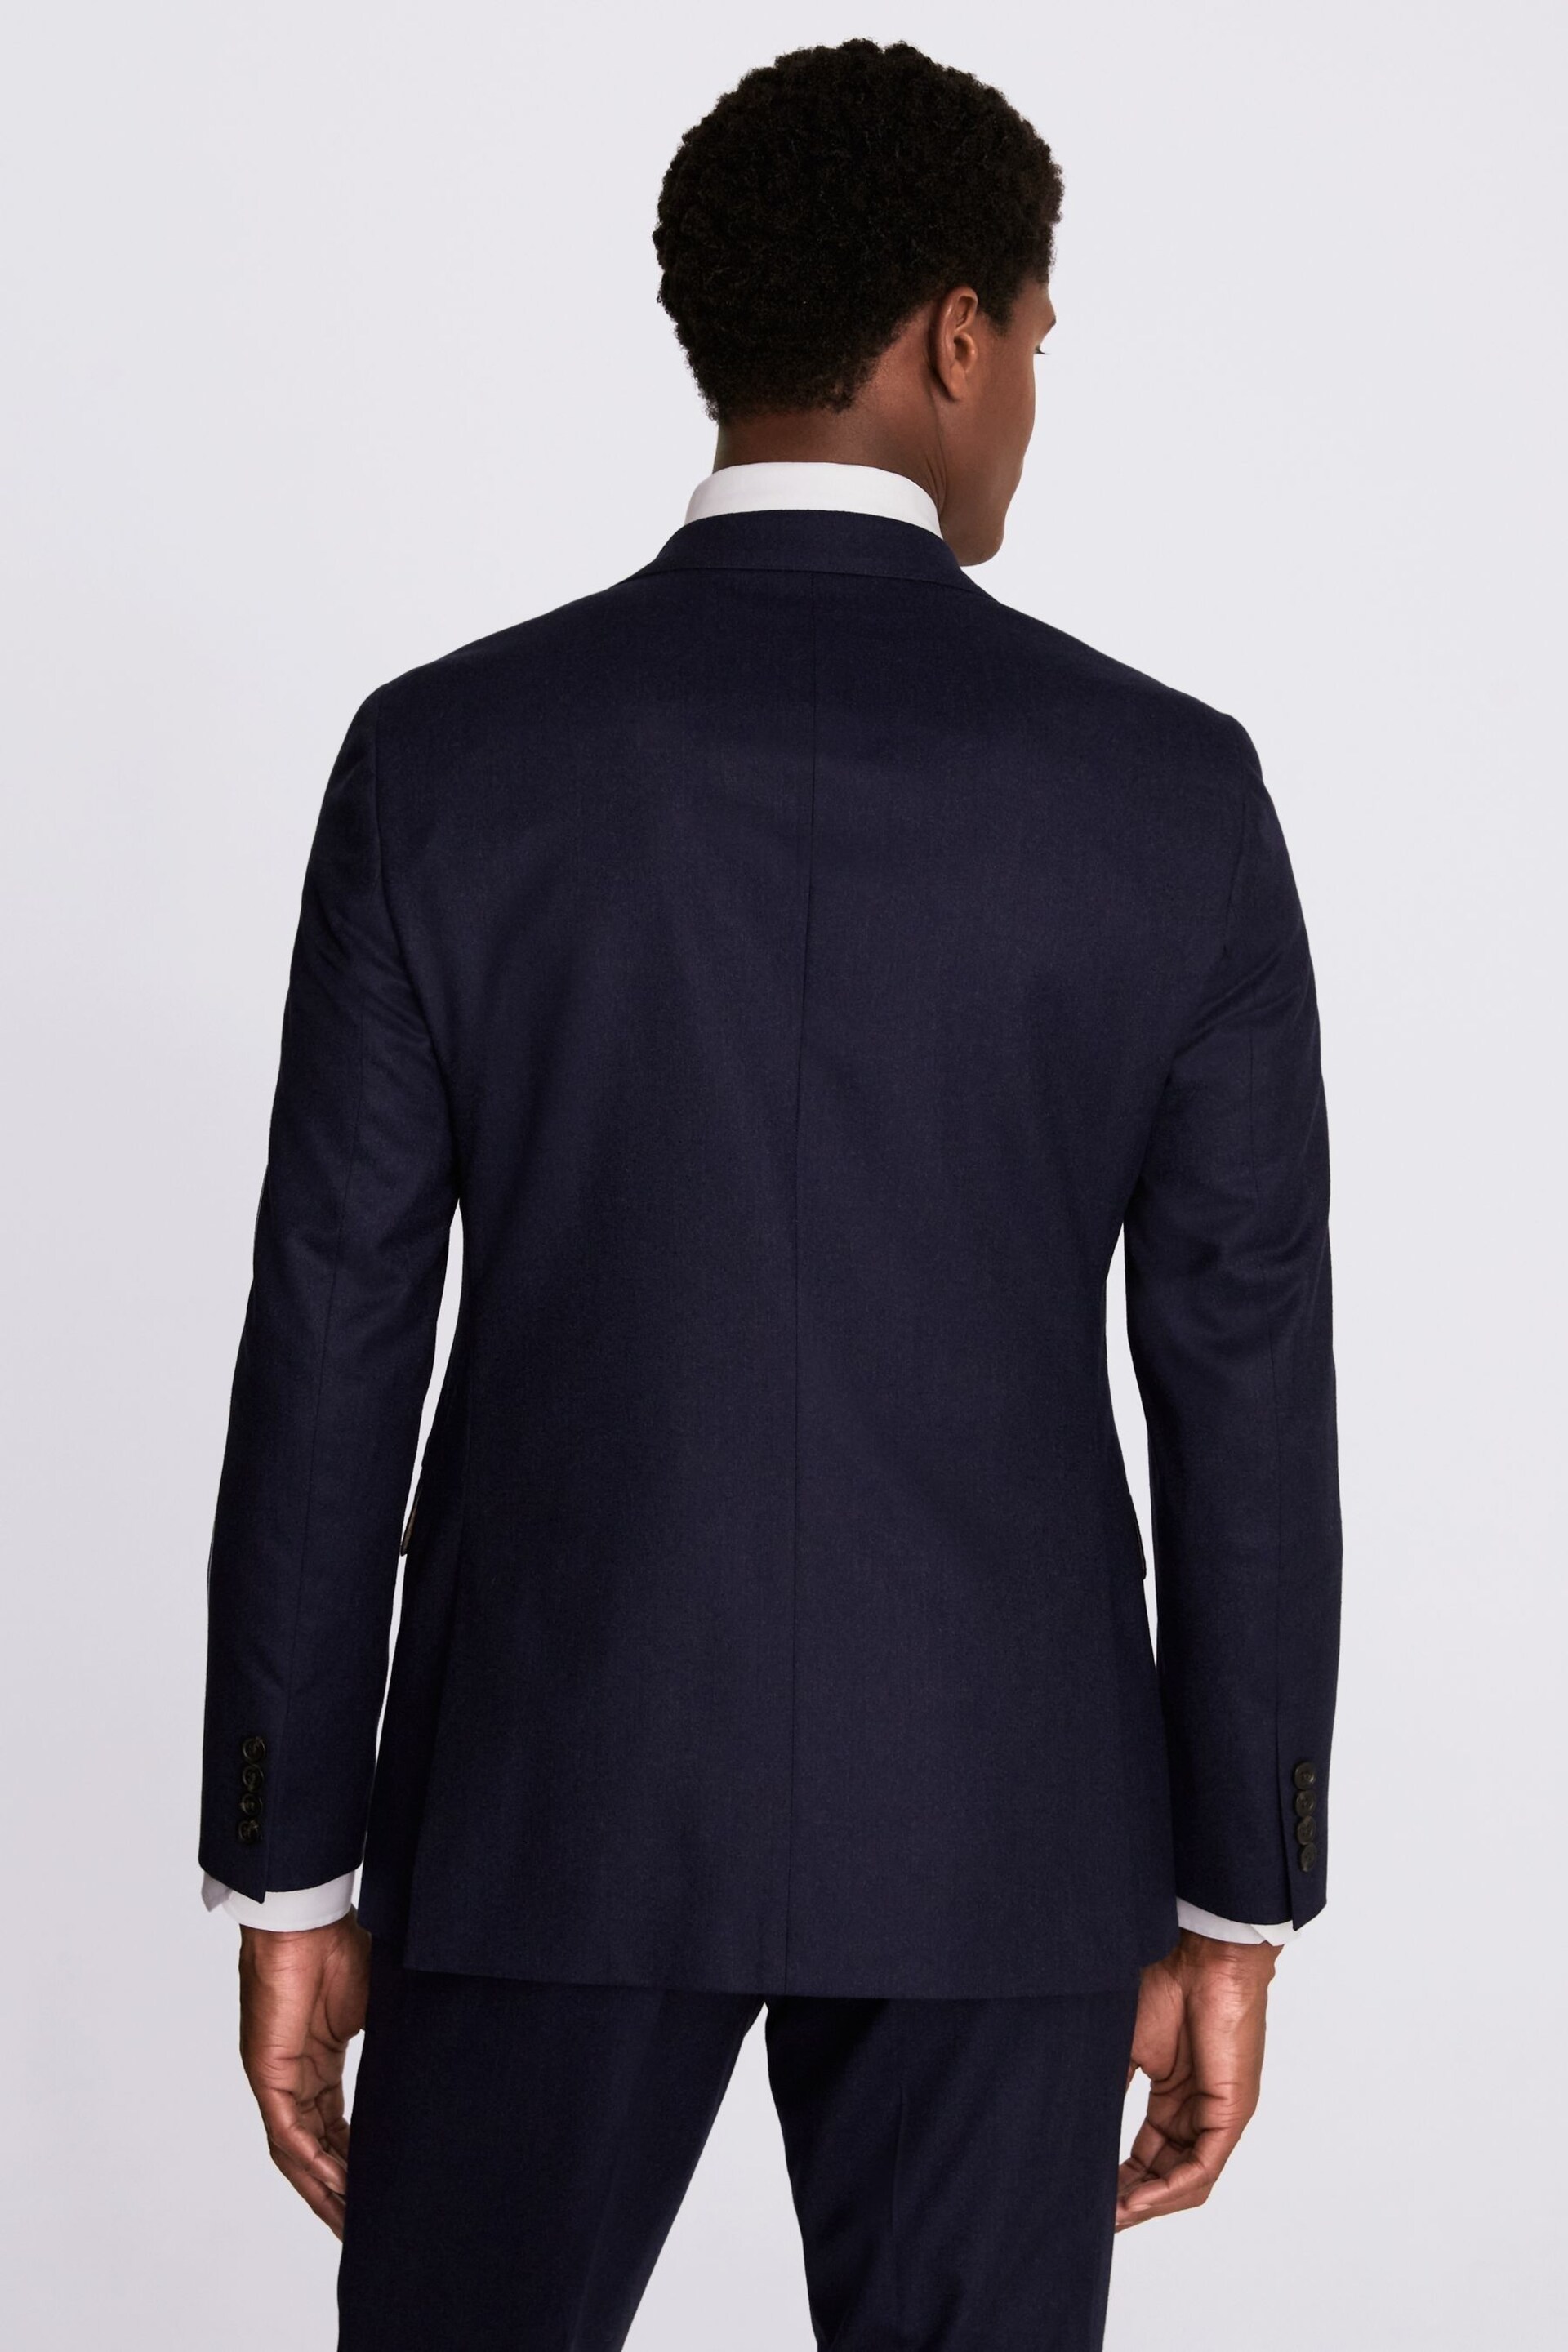 MOSS x Barberis Blue Tailored Fit Suit Jacket - Image 3 of 7